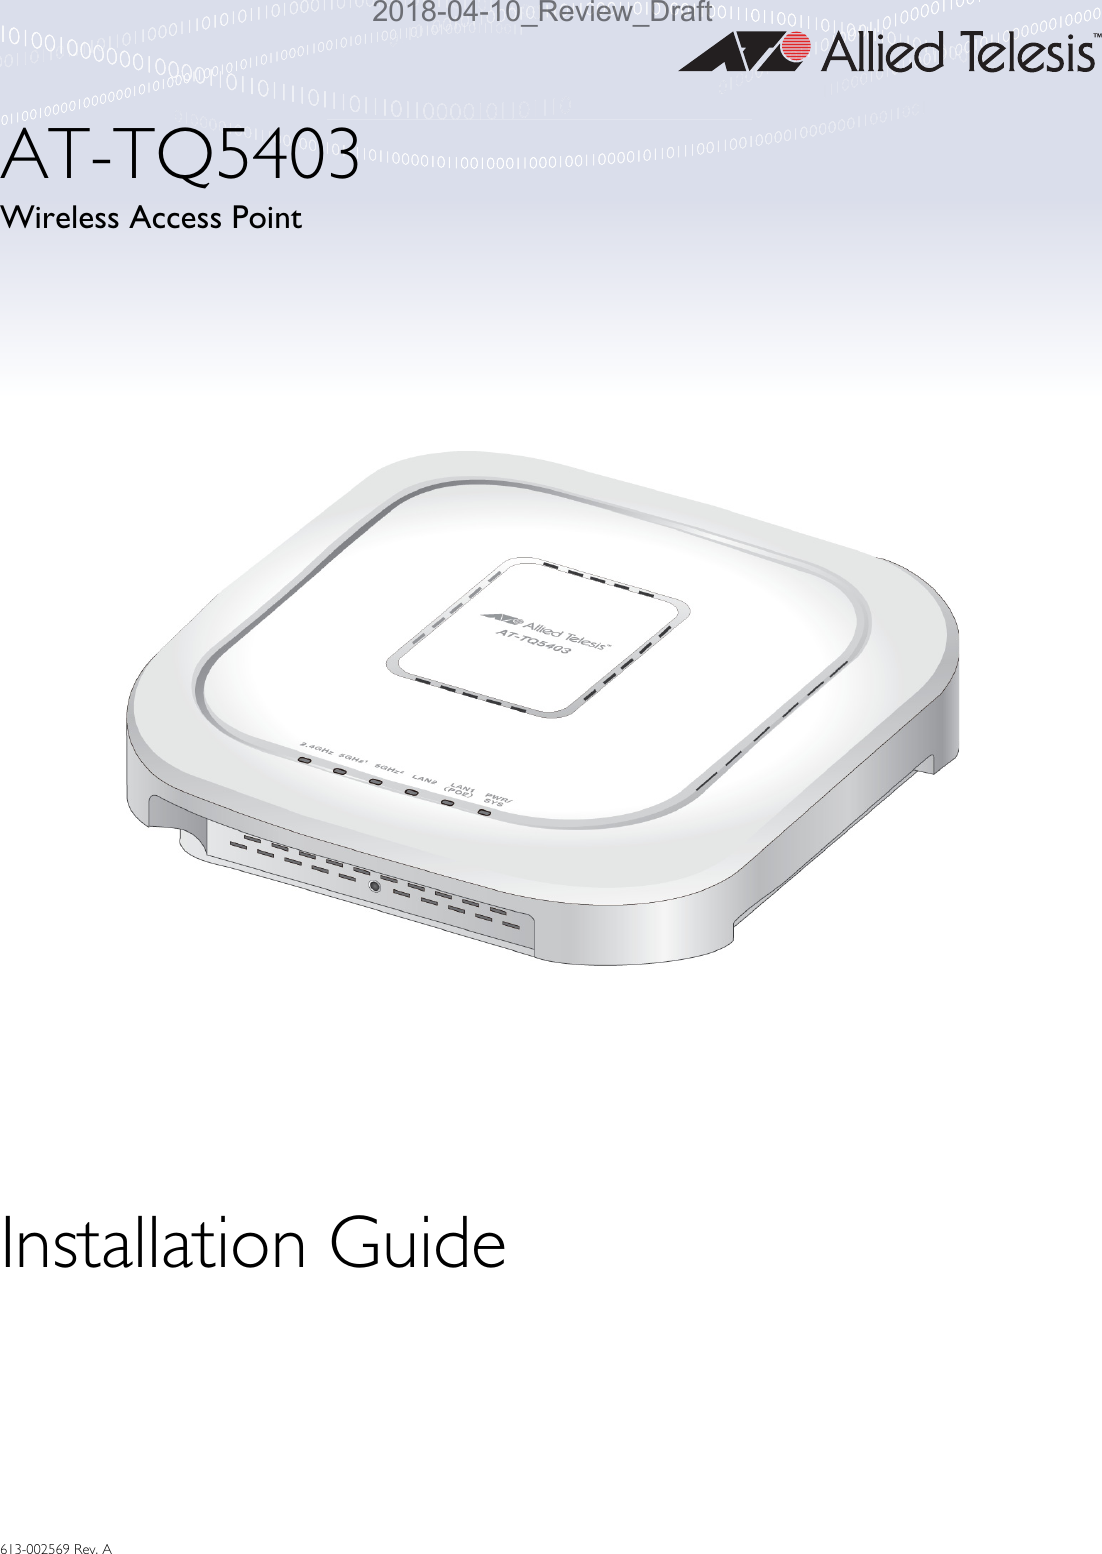 613-002569 Rev. AAT-TQ5403Wireless Access PointInstallation Guide2018-04-10_Review_Draft